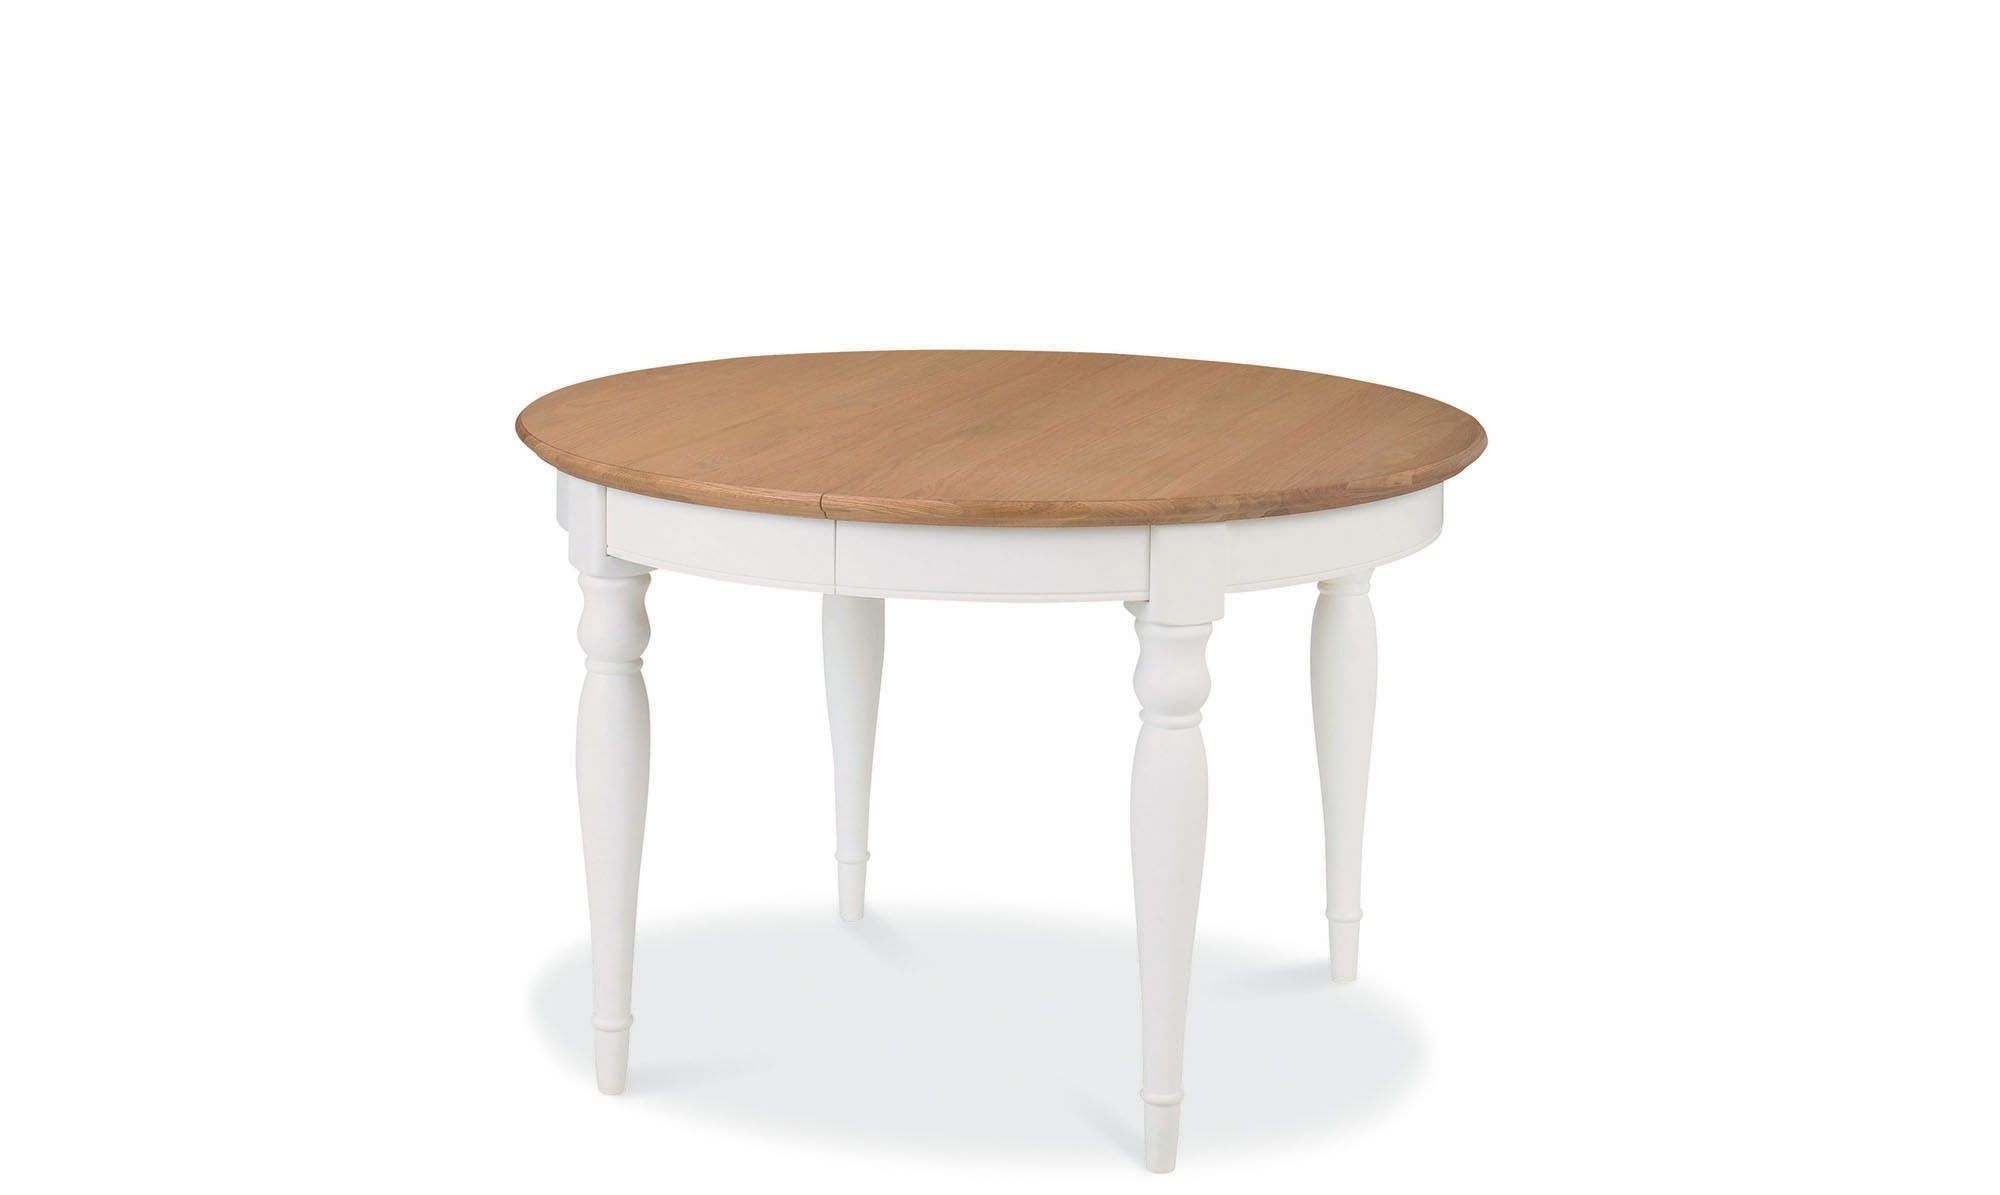 Most Recently Released Cool Round Extendable Dining Table With Maple Wood Top And White Pertaining To White Round Extendable Dining Tables (View 20 of 25)